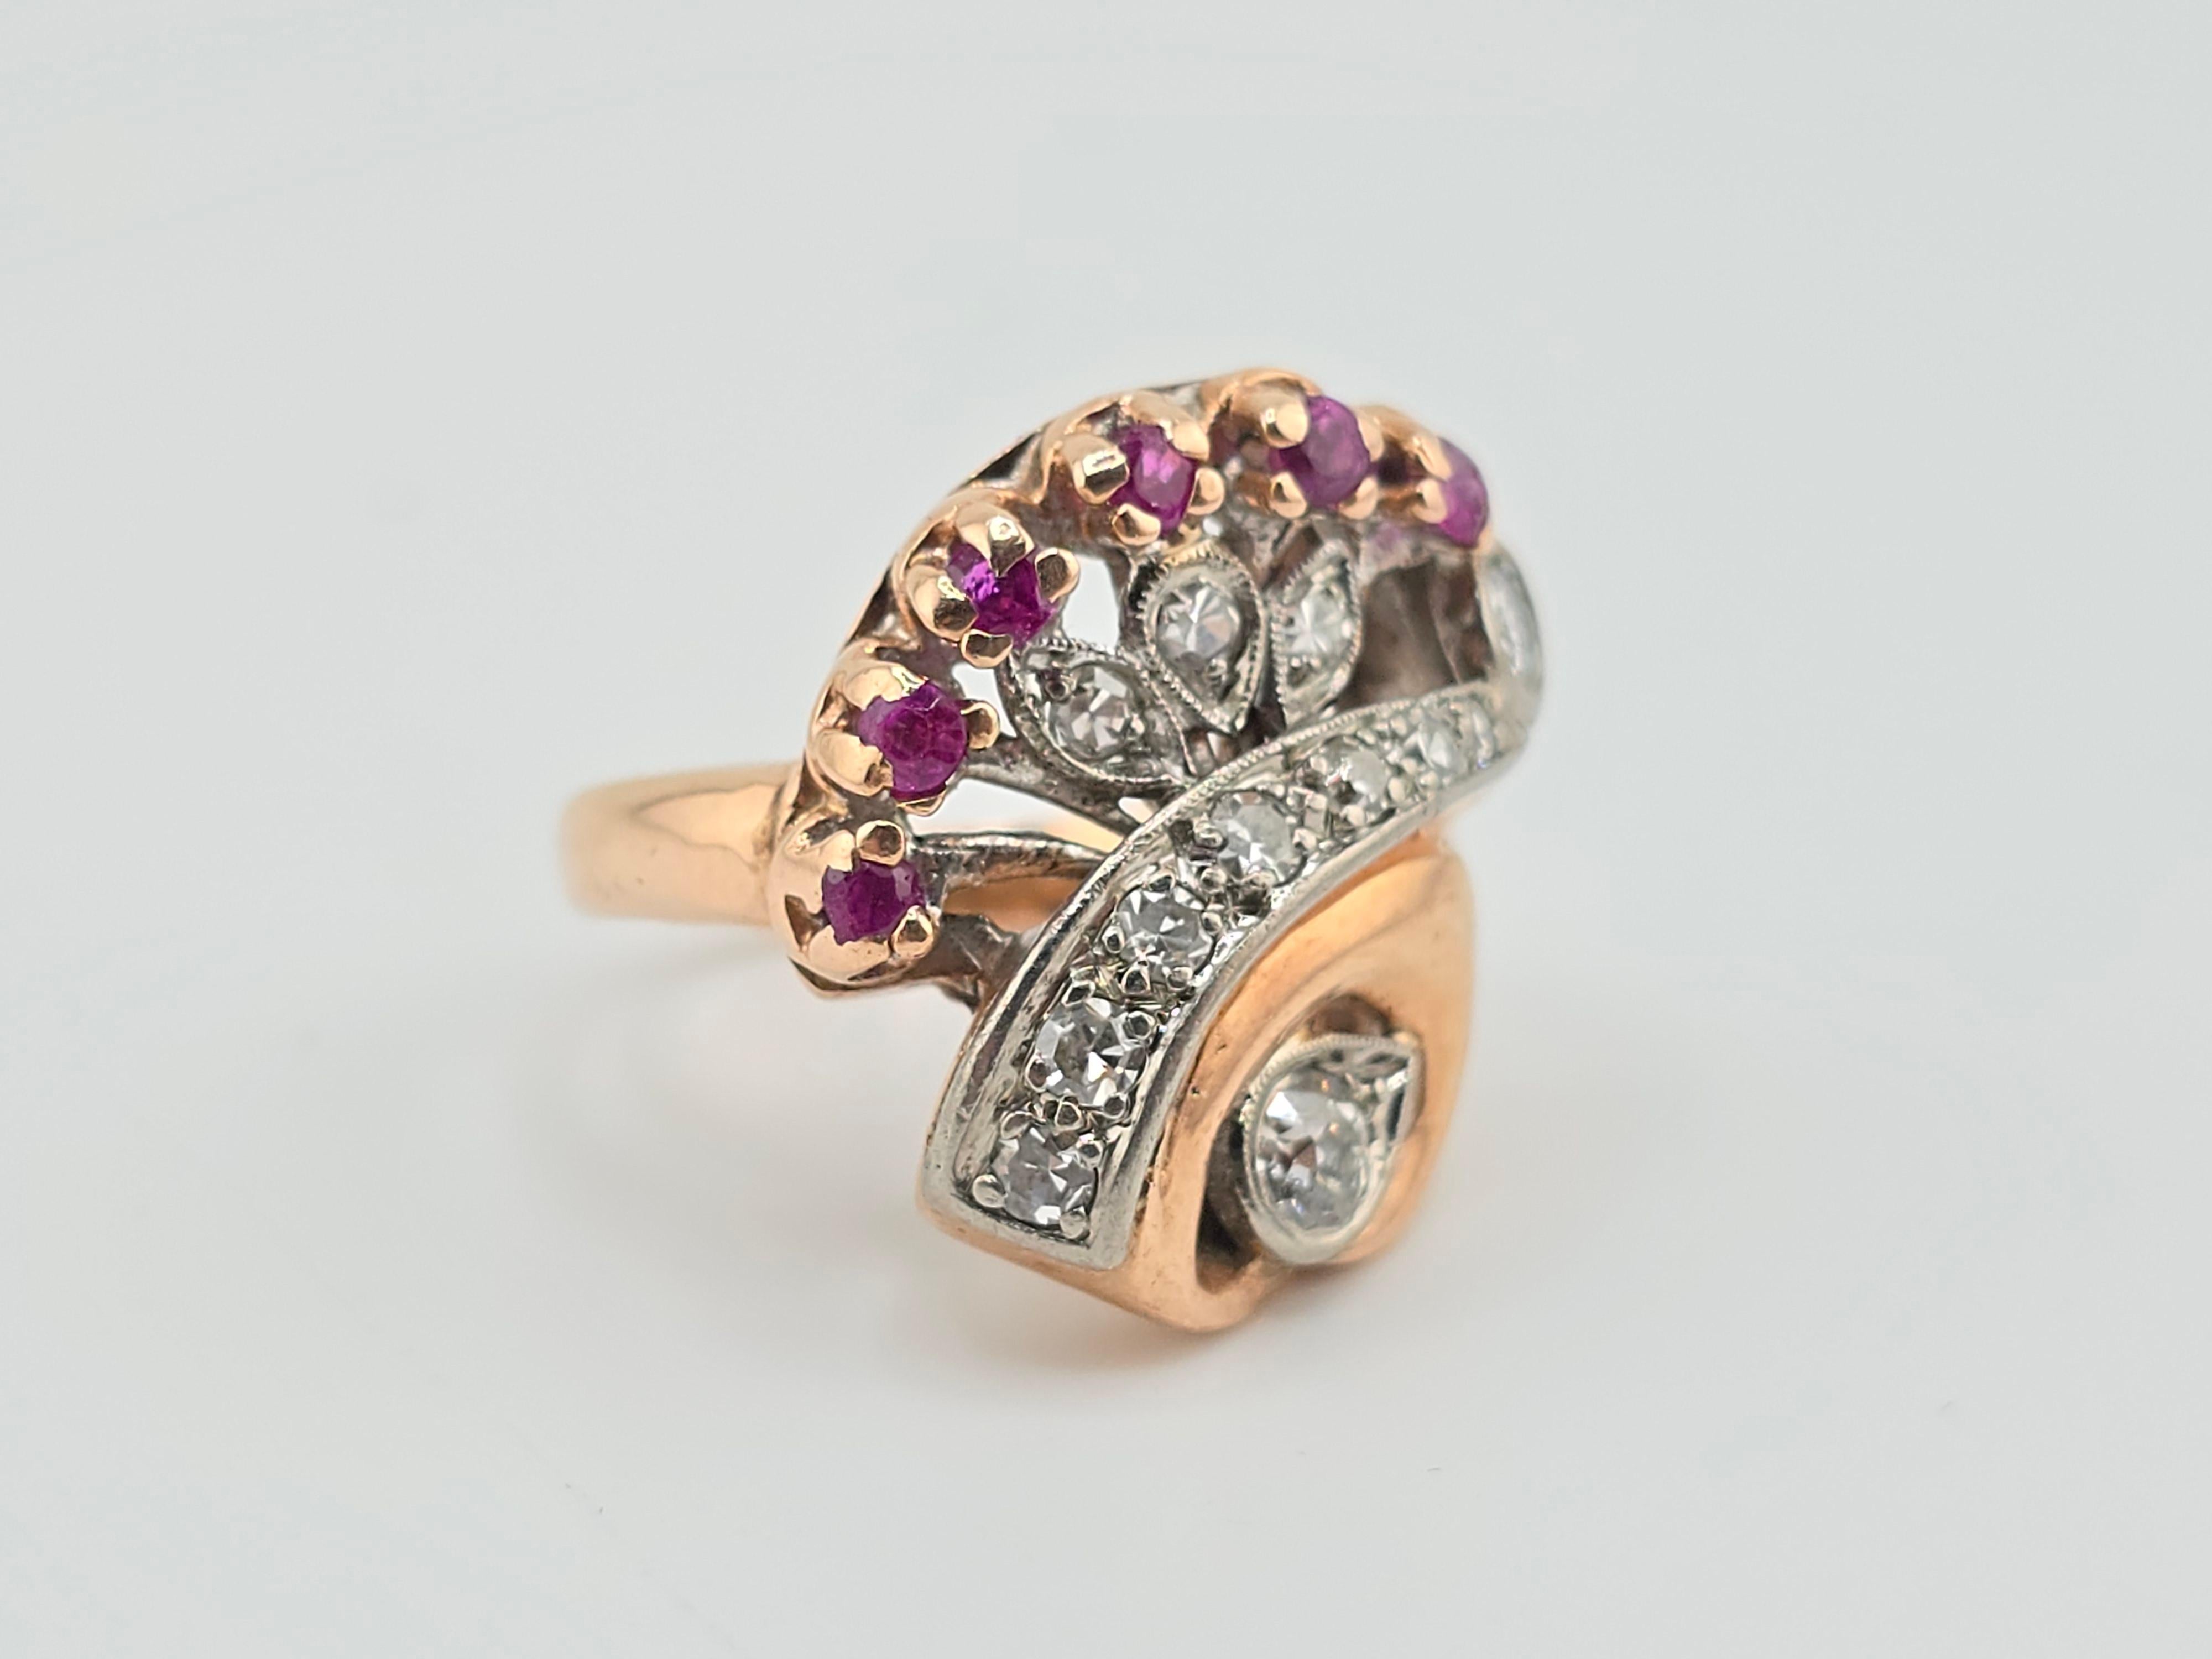 Antique Ruby & Diamond Ring Victorian Period 10.62 Grams In Good Condition For Sale In Media, PA